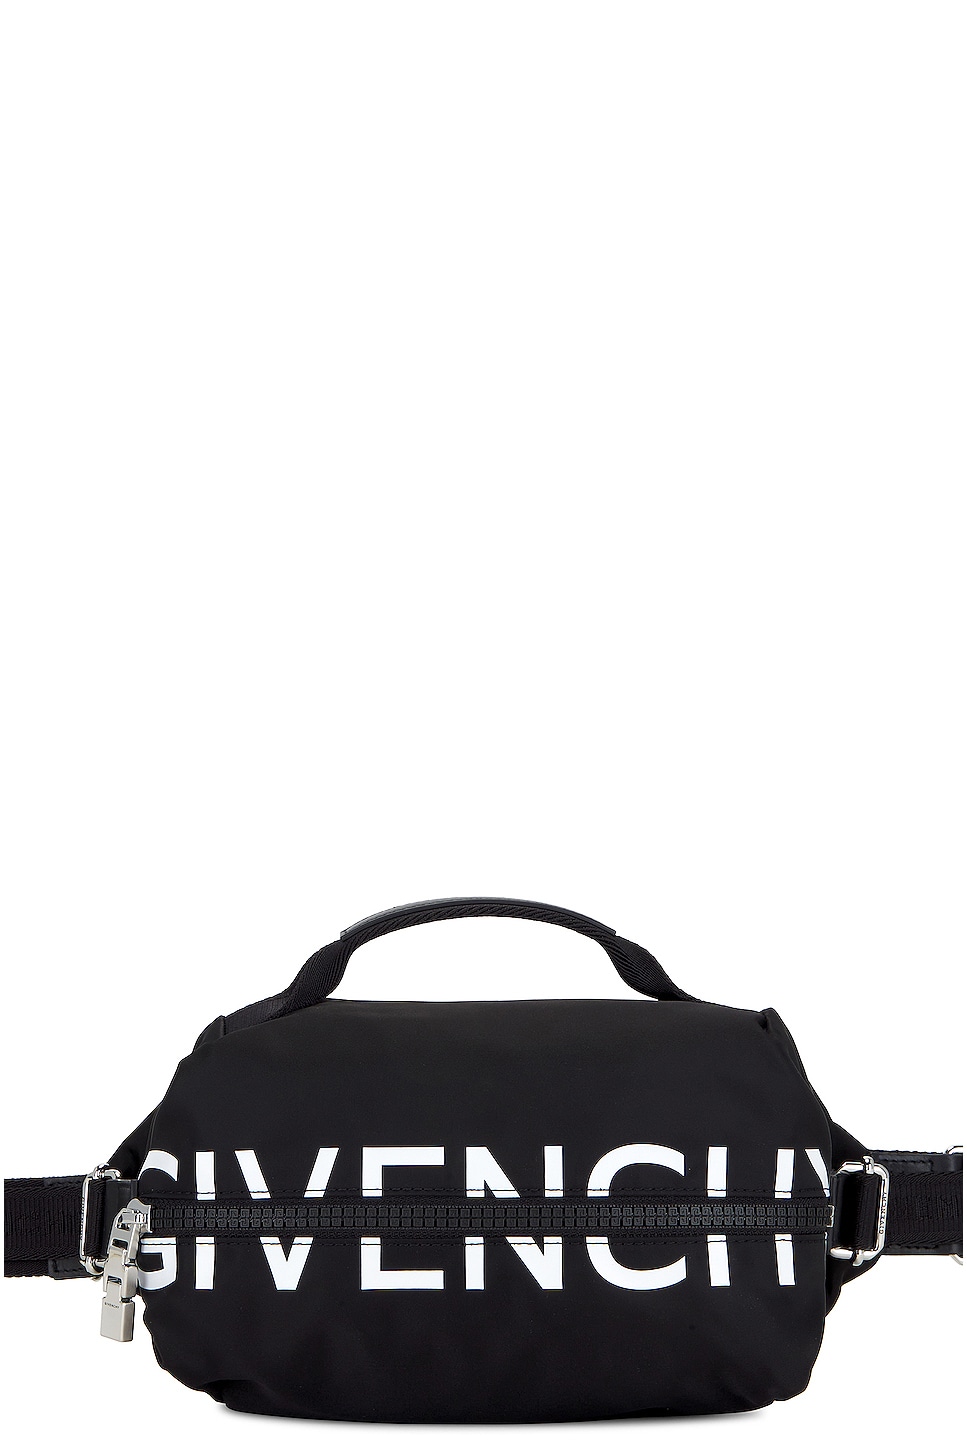 Givenchy G-zip Bumbag in Black